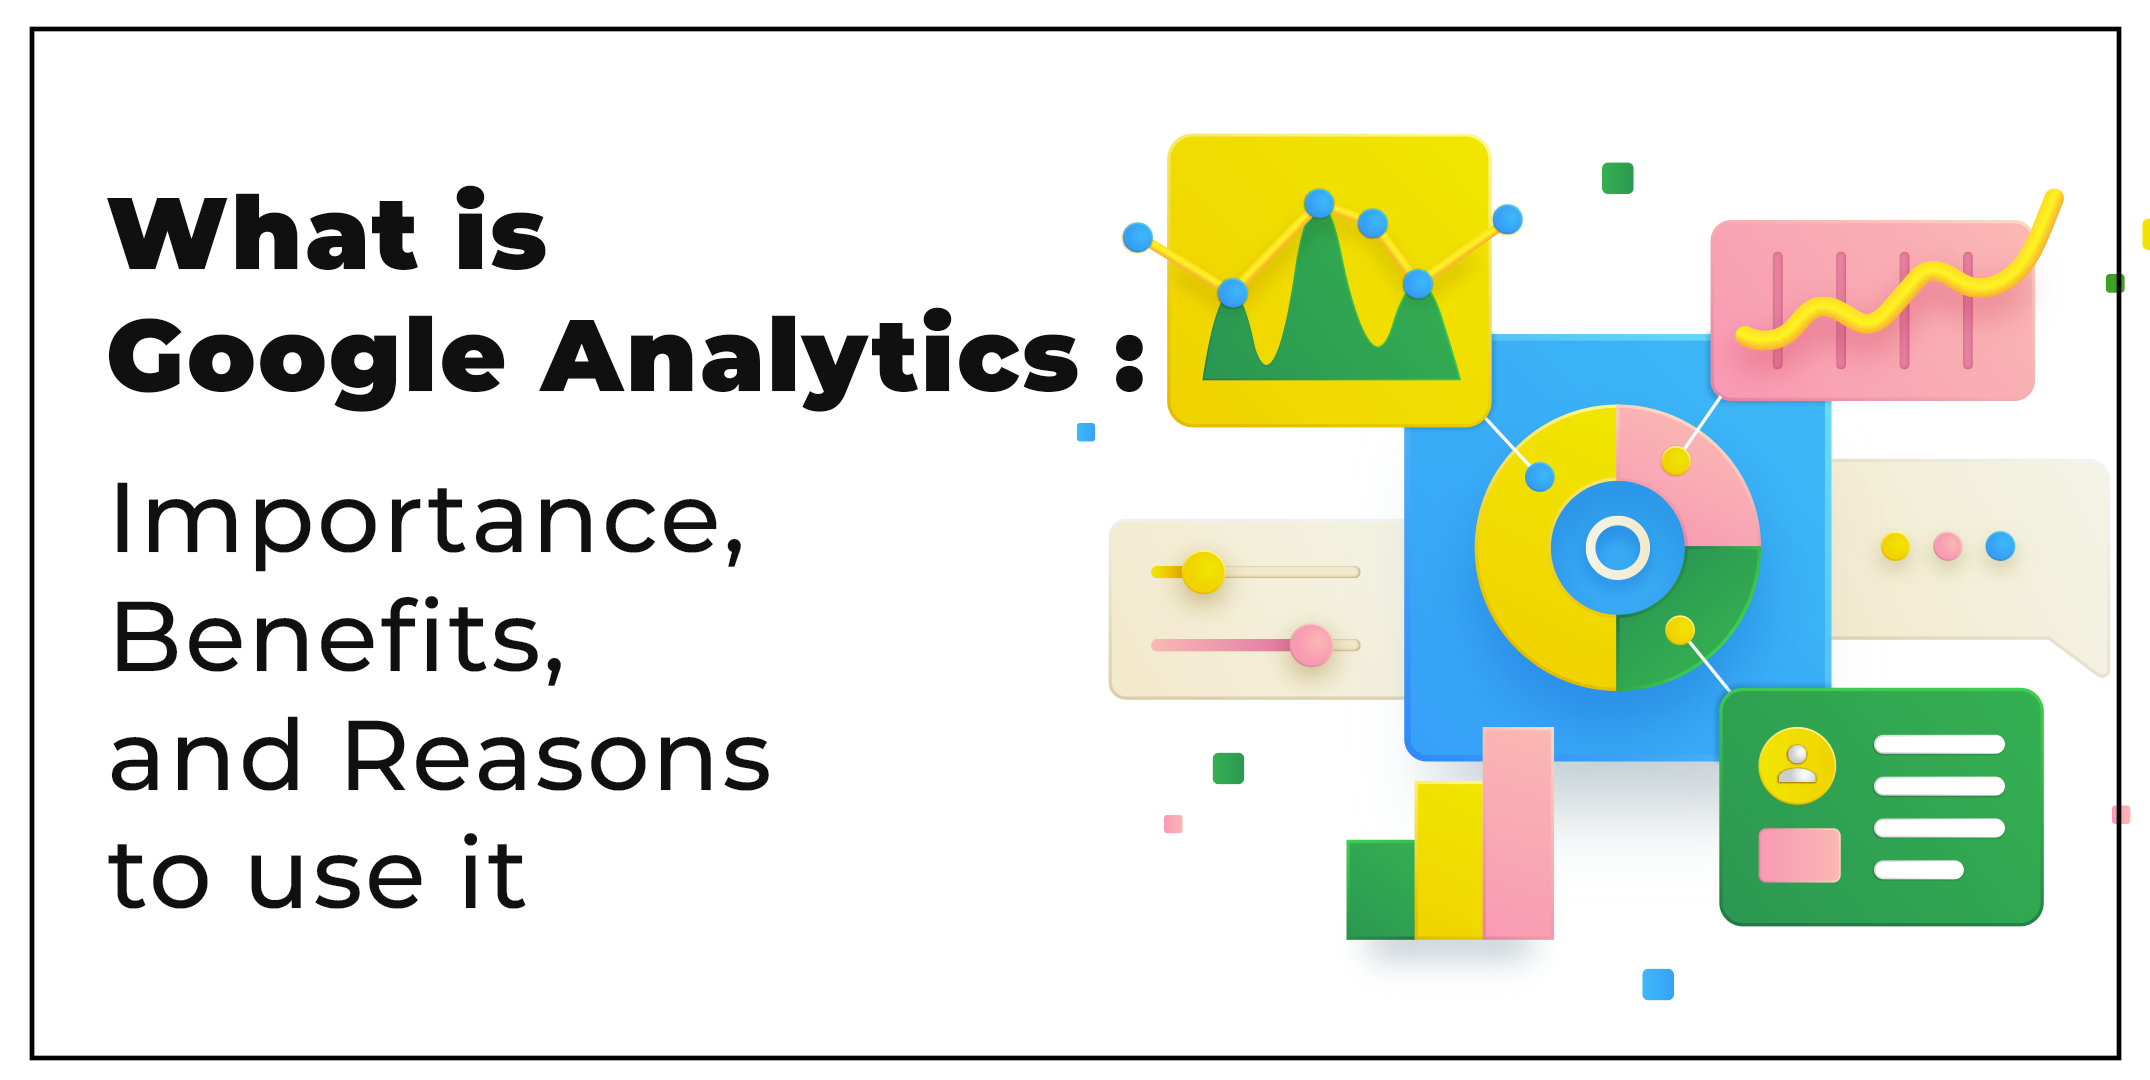 What is Google Analytics - Importance, Benefits, and Reasons to use it